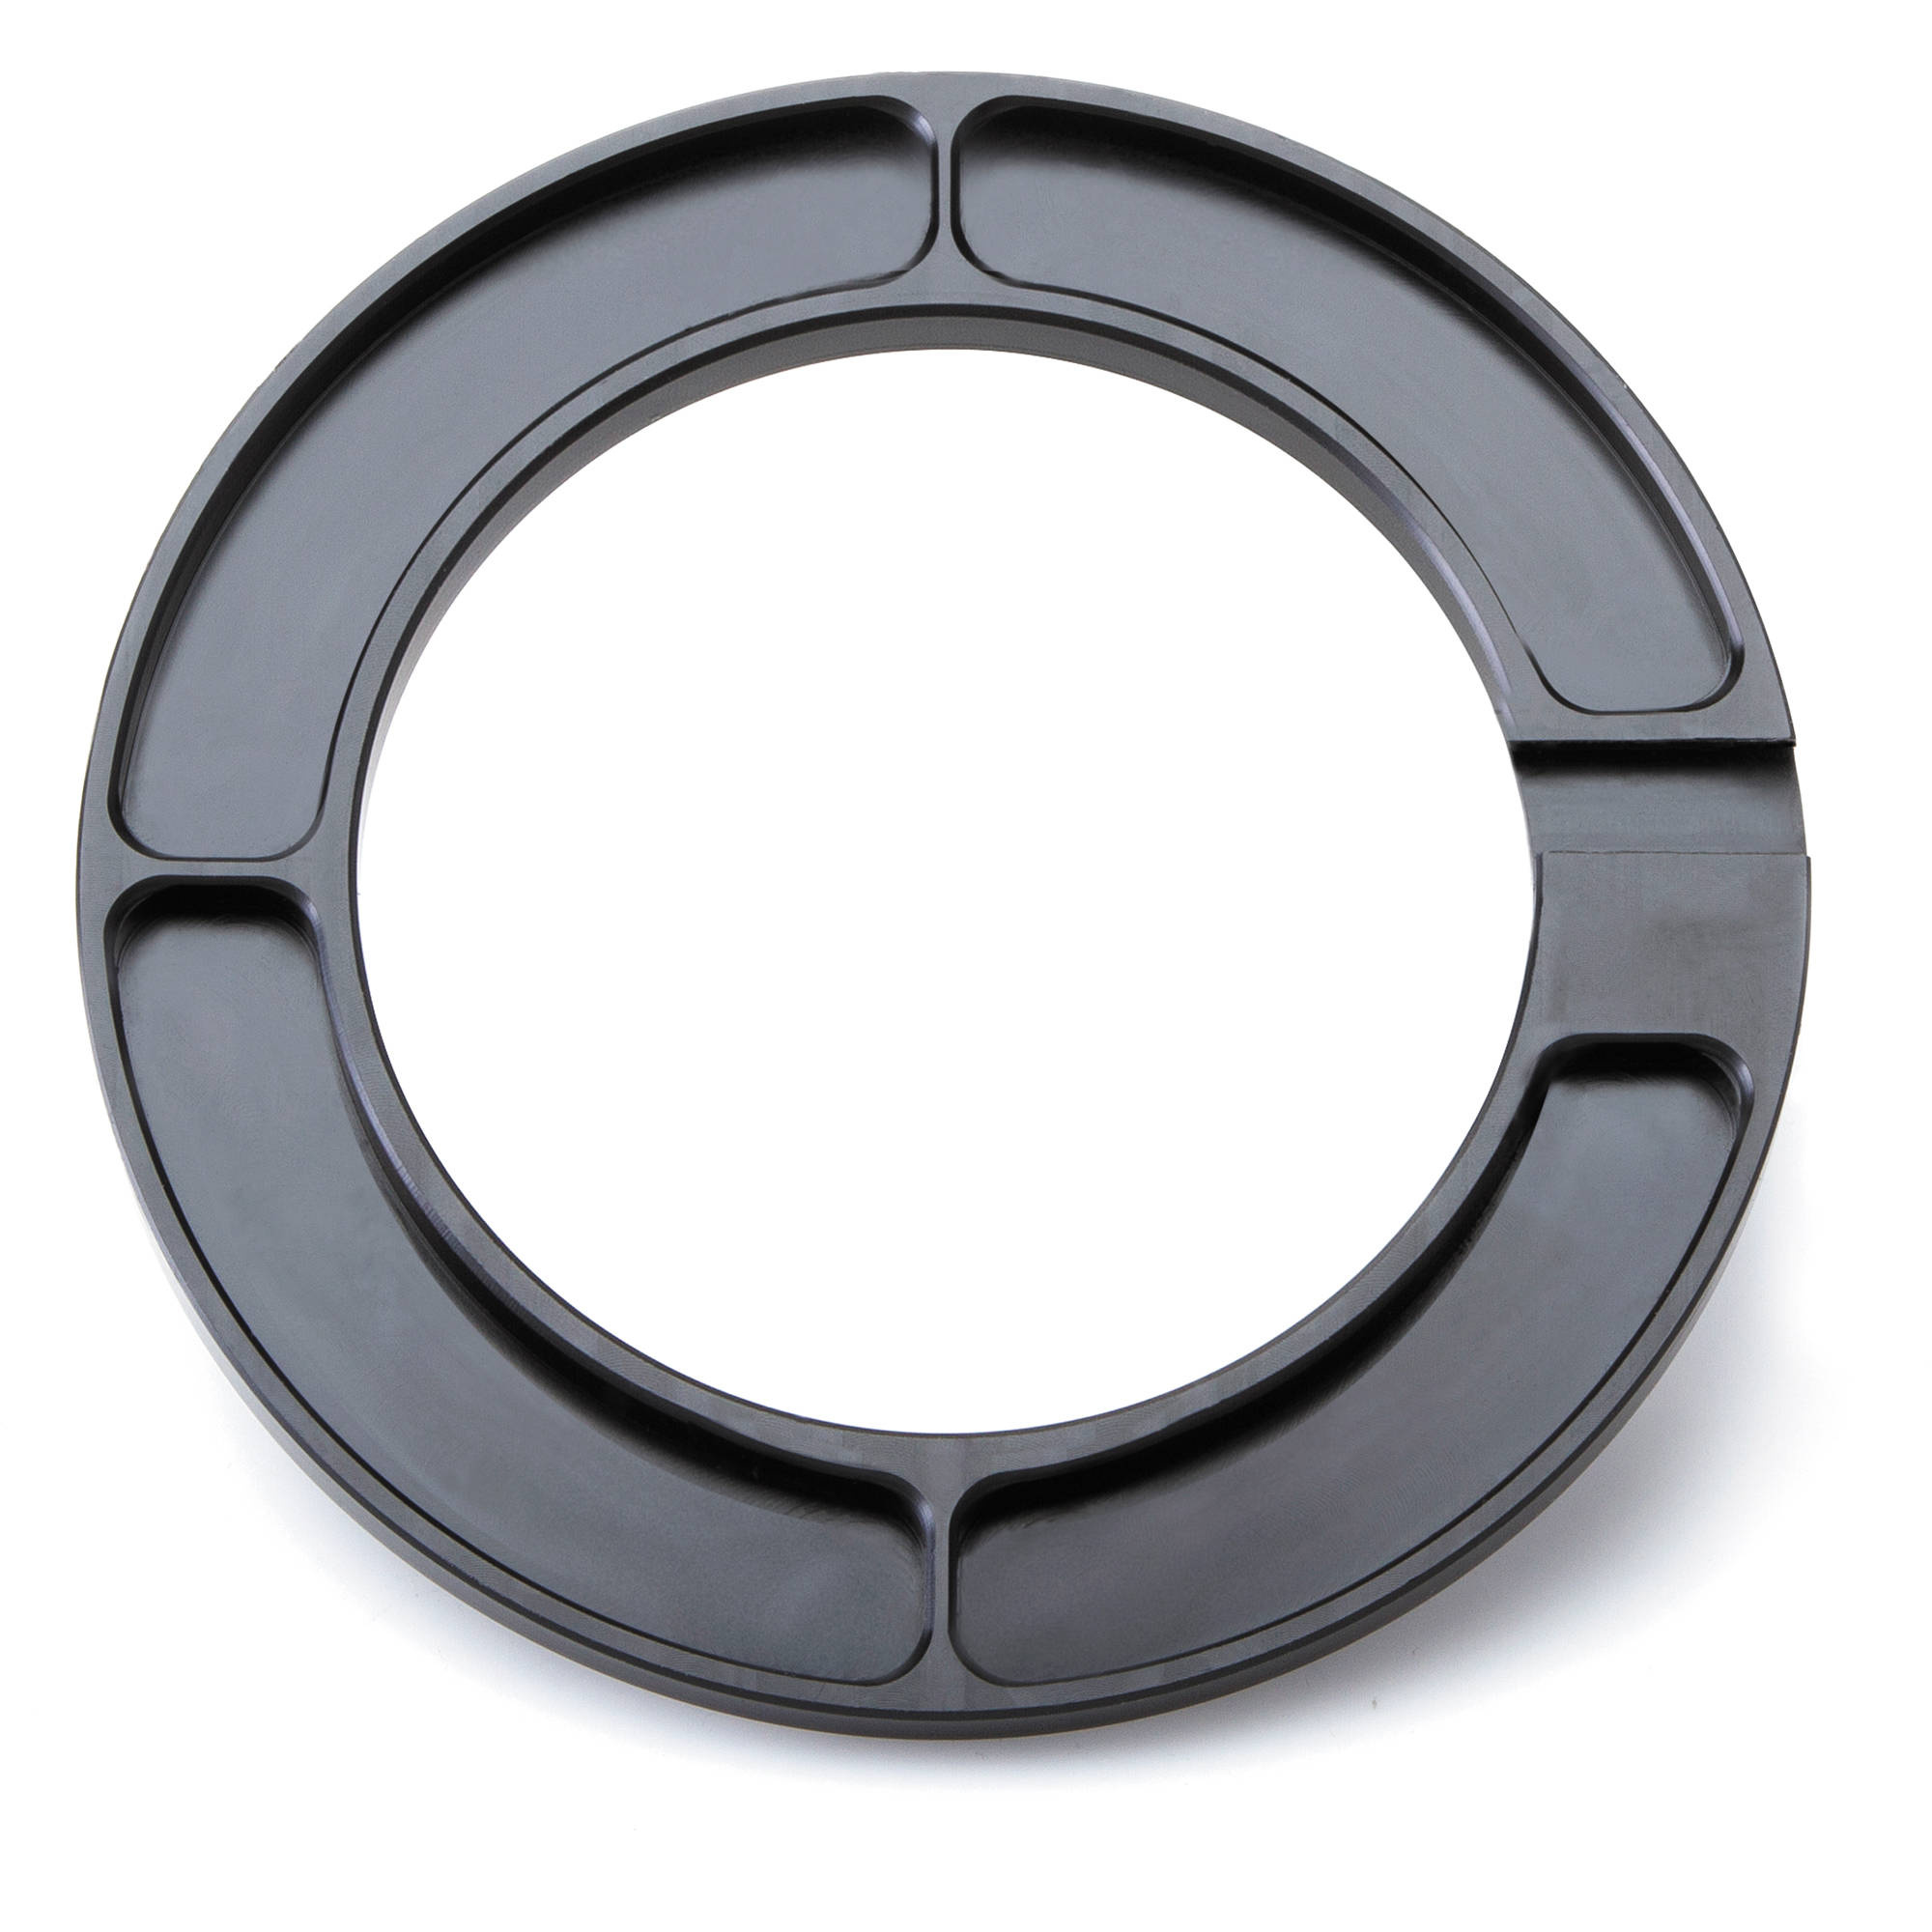 Redrock Micro 136mm Lens Adapter for the microMatteBox Clamp-On Adapter